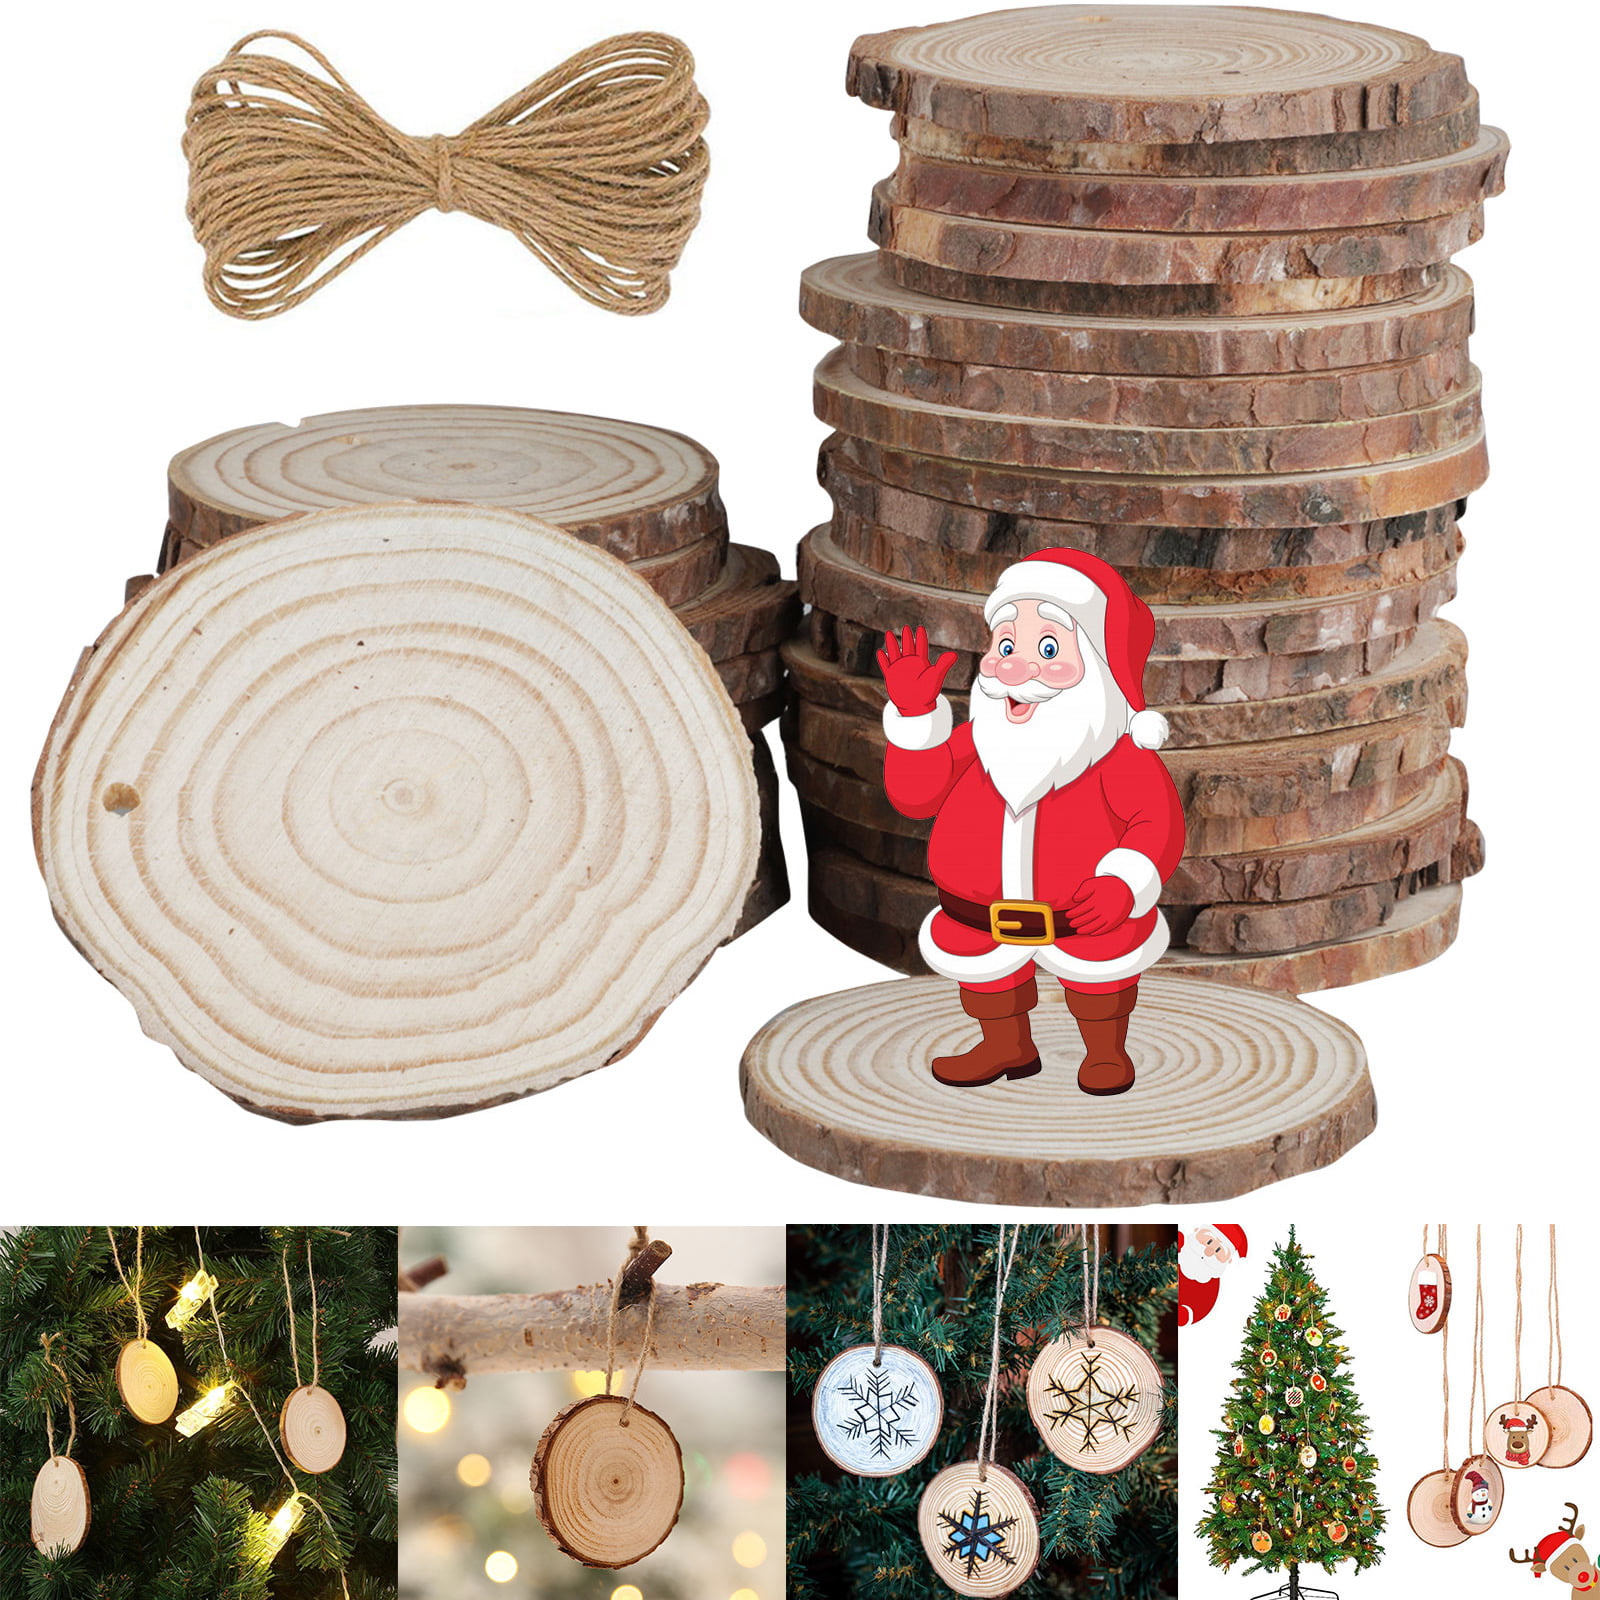 Natural Wood Slices 30 Pcs 2.4-2.8 inches Craft Wooden Circles Unfinished Wood Slices kit Predrilled Hole with 33 Feet String for Arts Wood Slices Christmas Ornaments DIY Crafts 